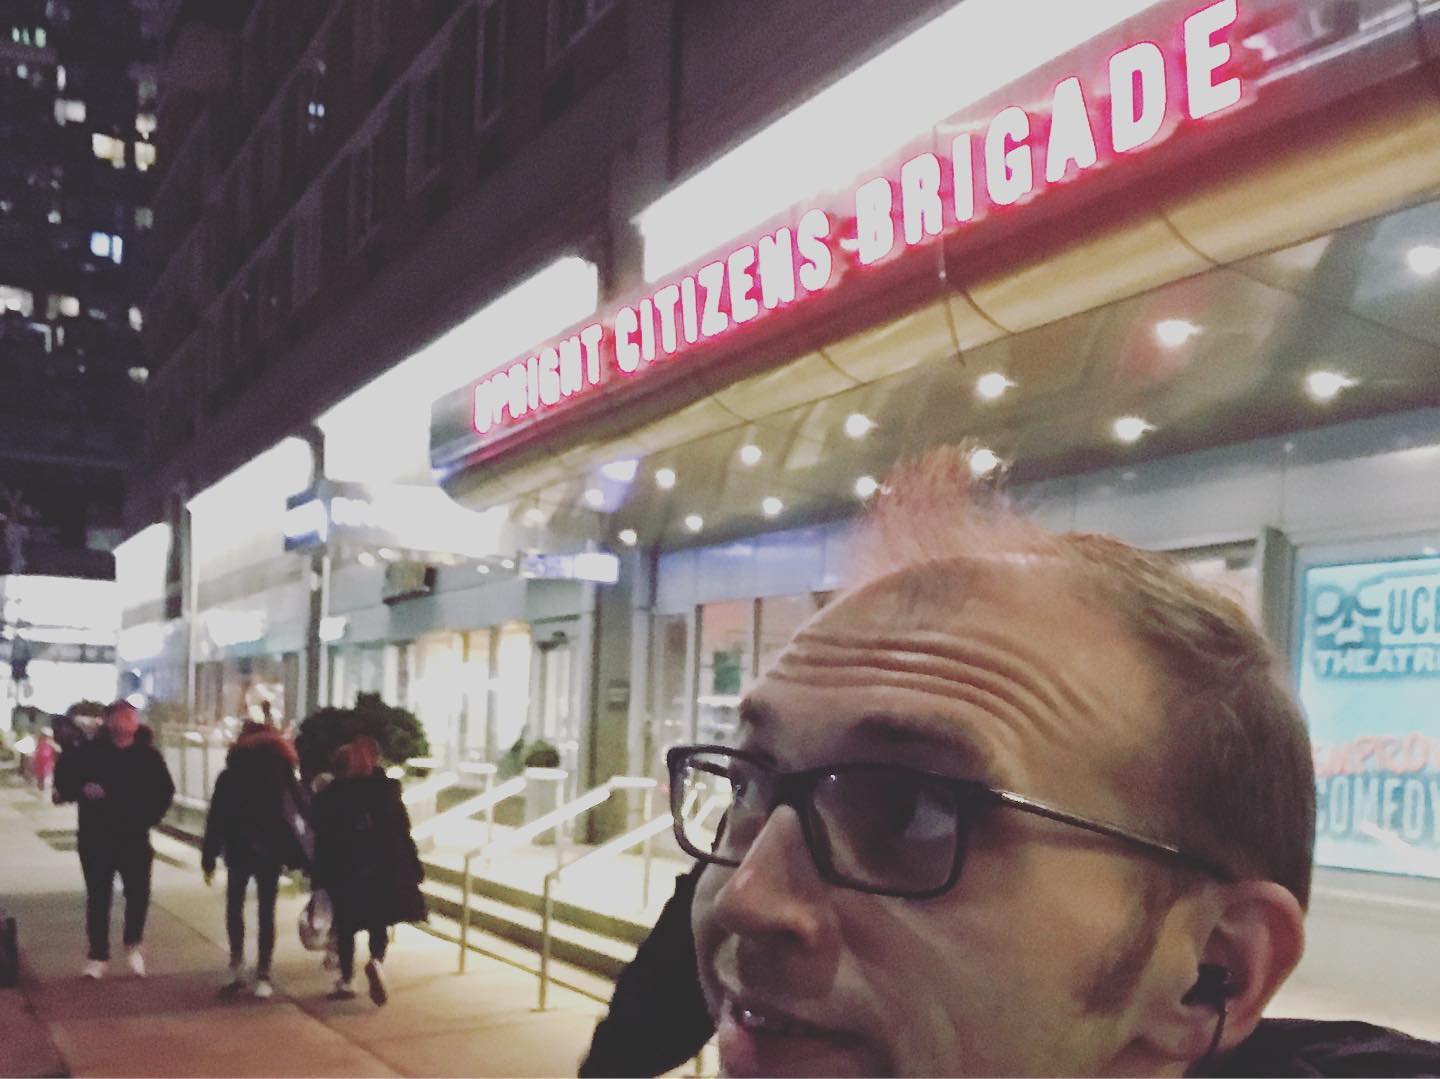 Outside Upright Citizen's Brigade Theater in Hell's Kitchen in NYC